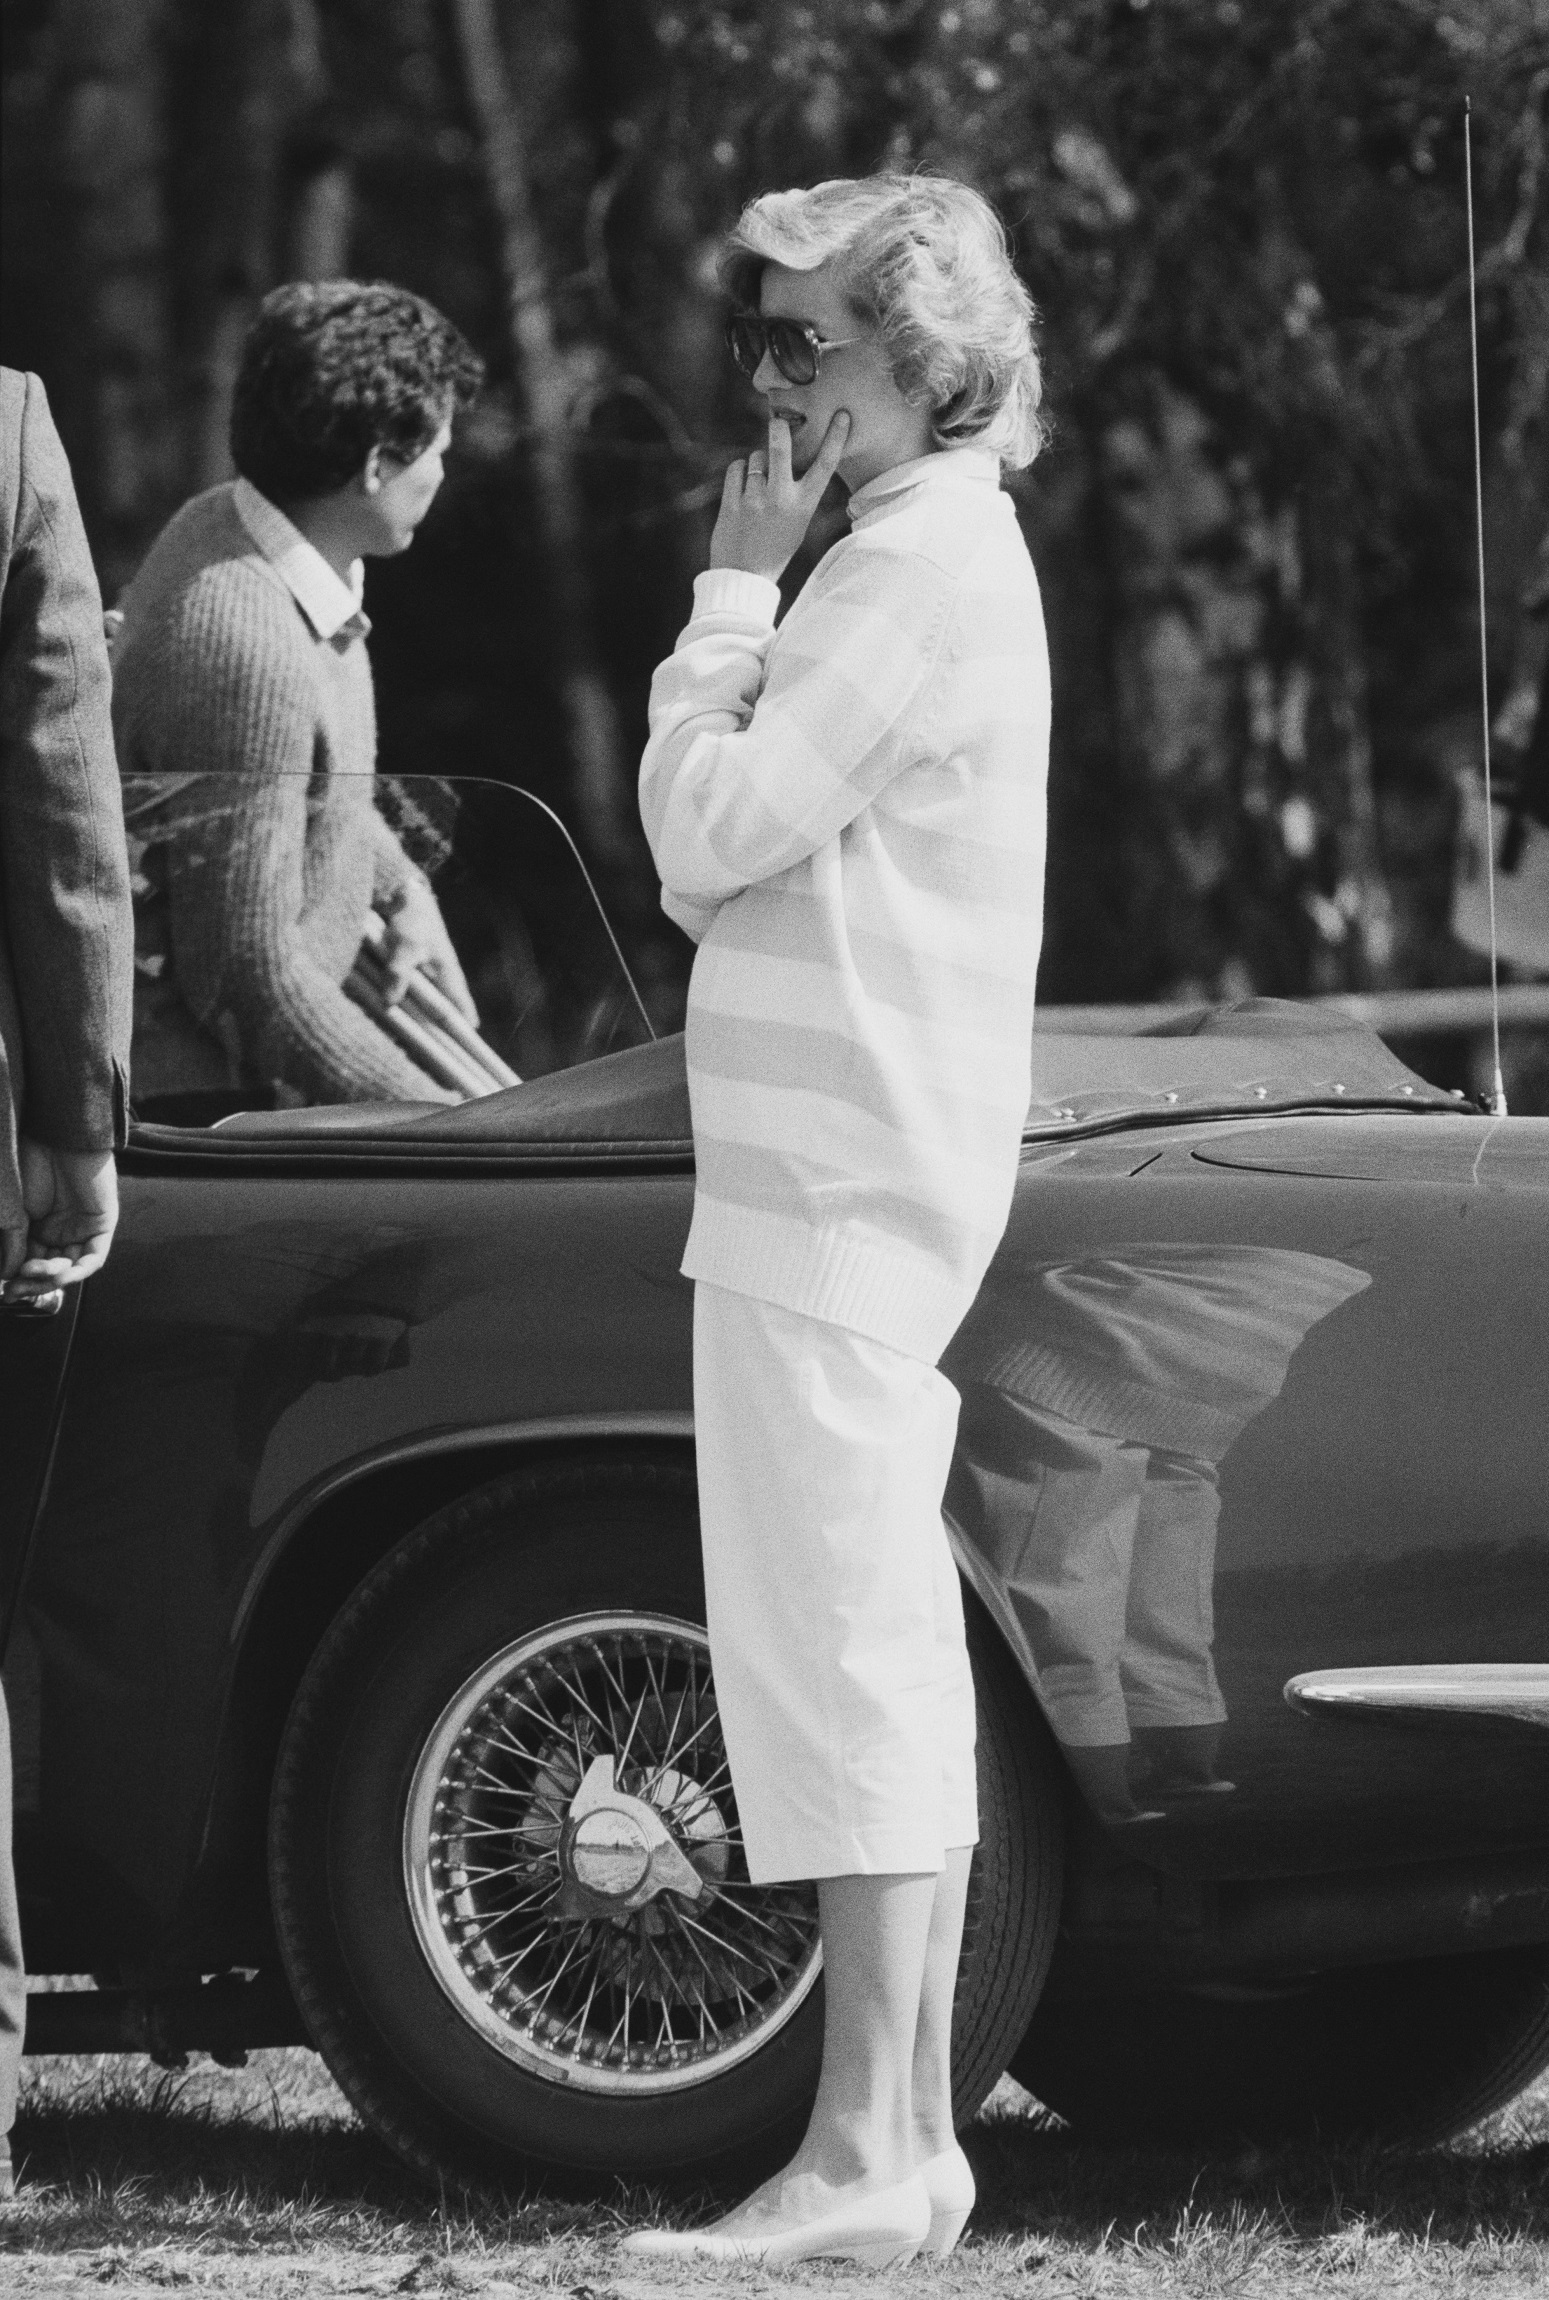 Diana, Princess of Wales (1961 - 1997) attends a polo match, UK, 30th April 1984. (Photo by Steve Wood/Daily Express/Hulton Archive/Getty Images)